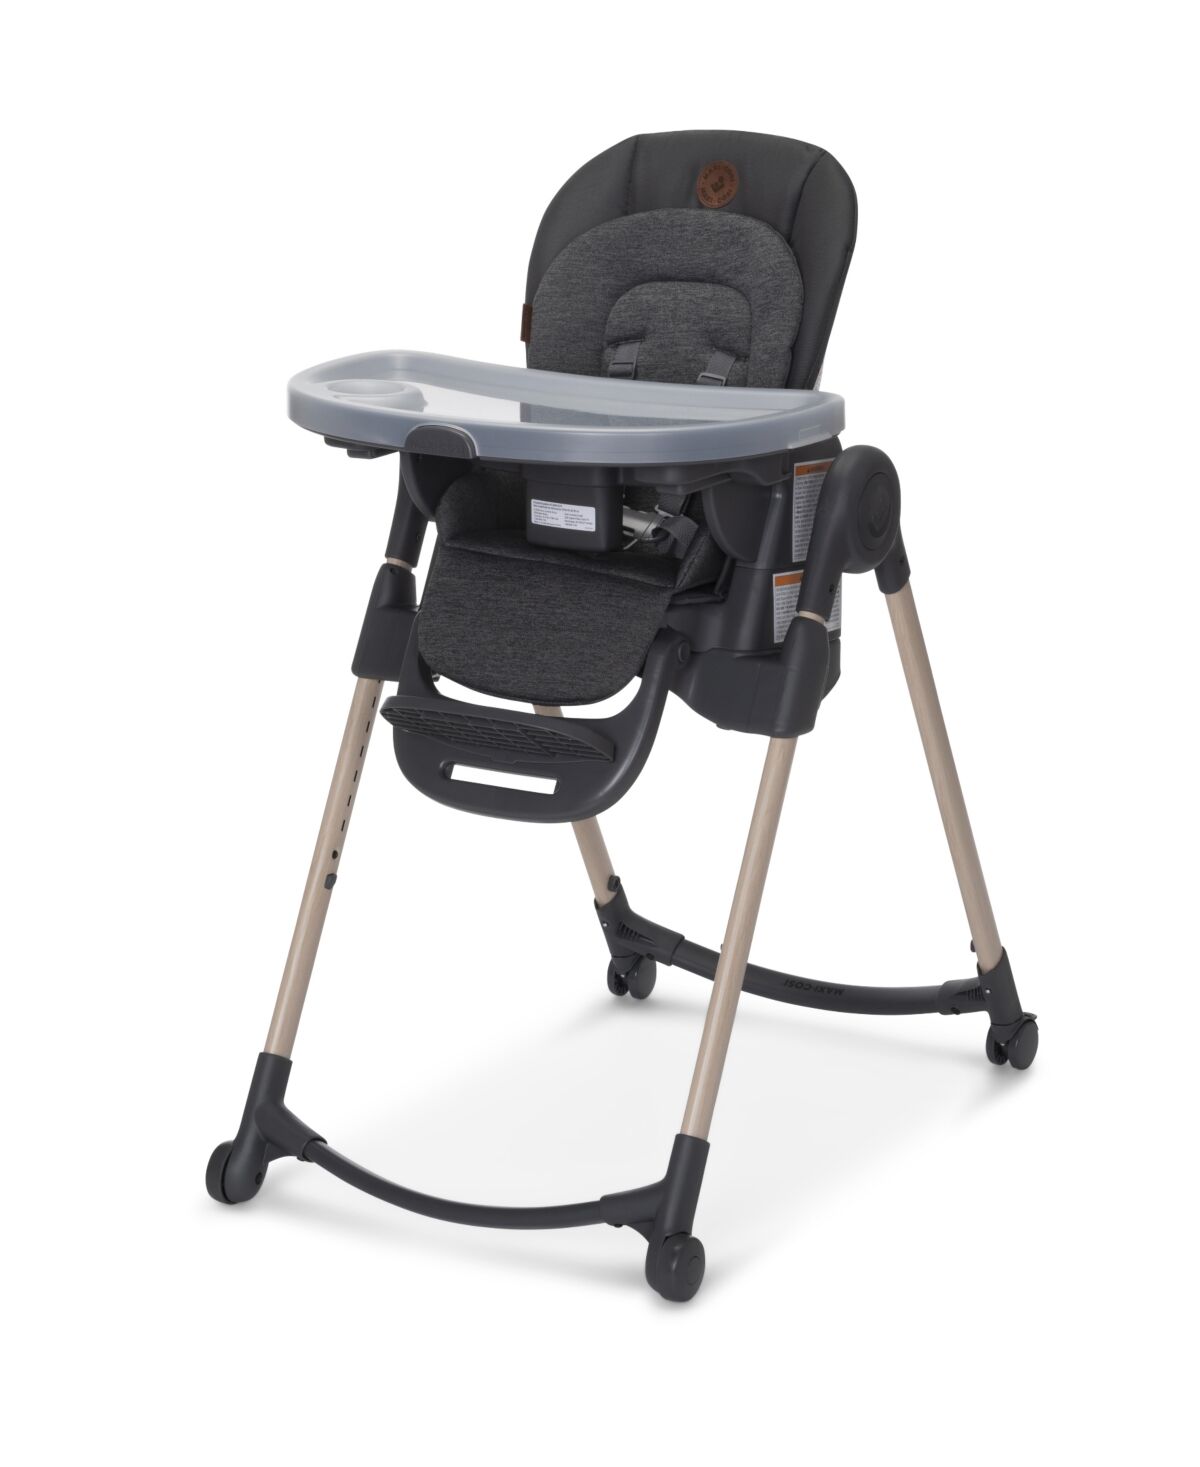 Maxi-Cosi Baby Boys or Baby Girls Minla 6-in-1 Adjustable High Chair - Classic Graphite